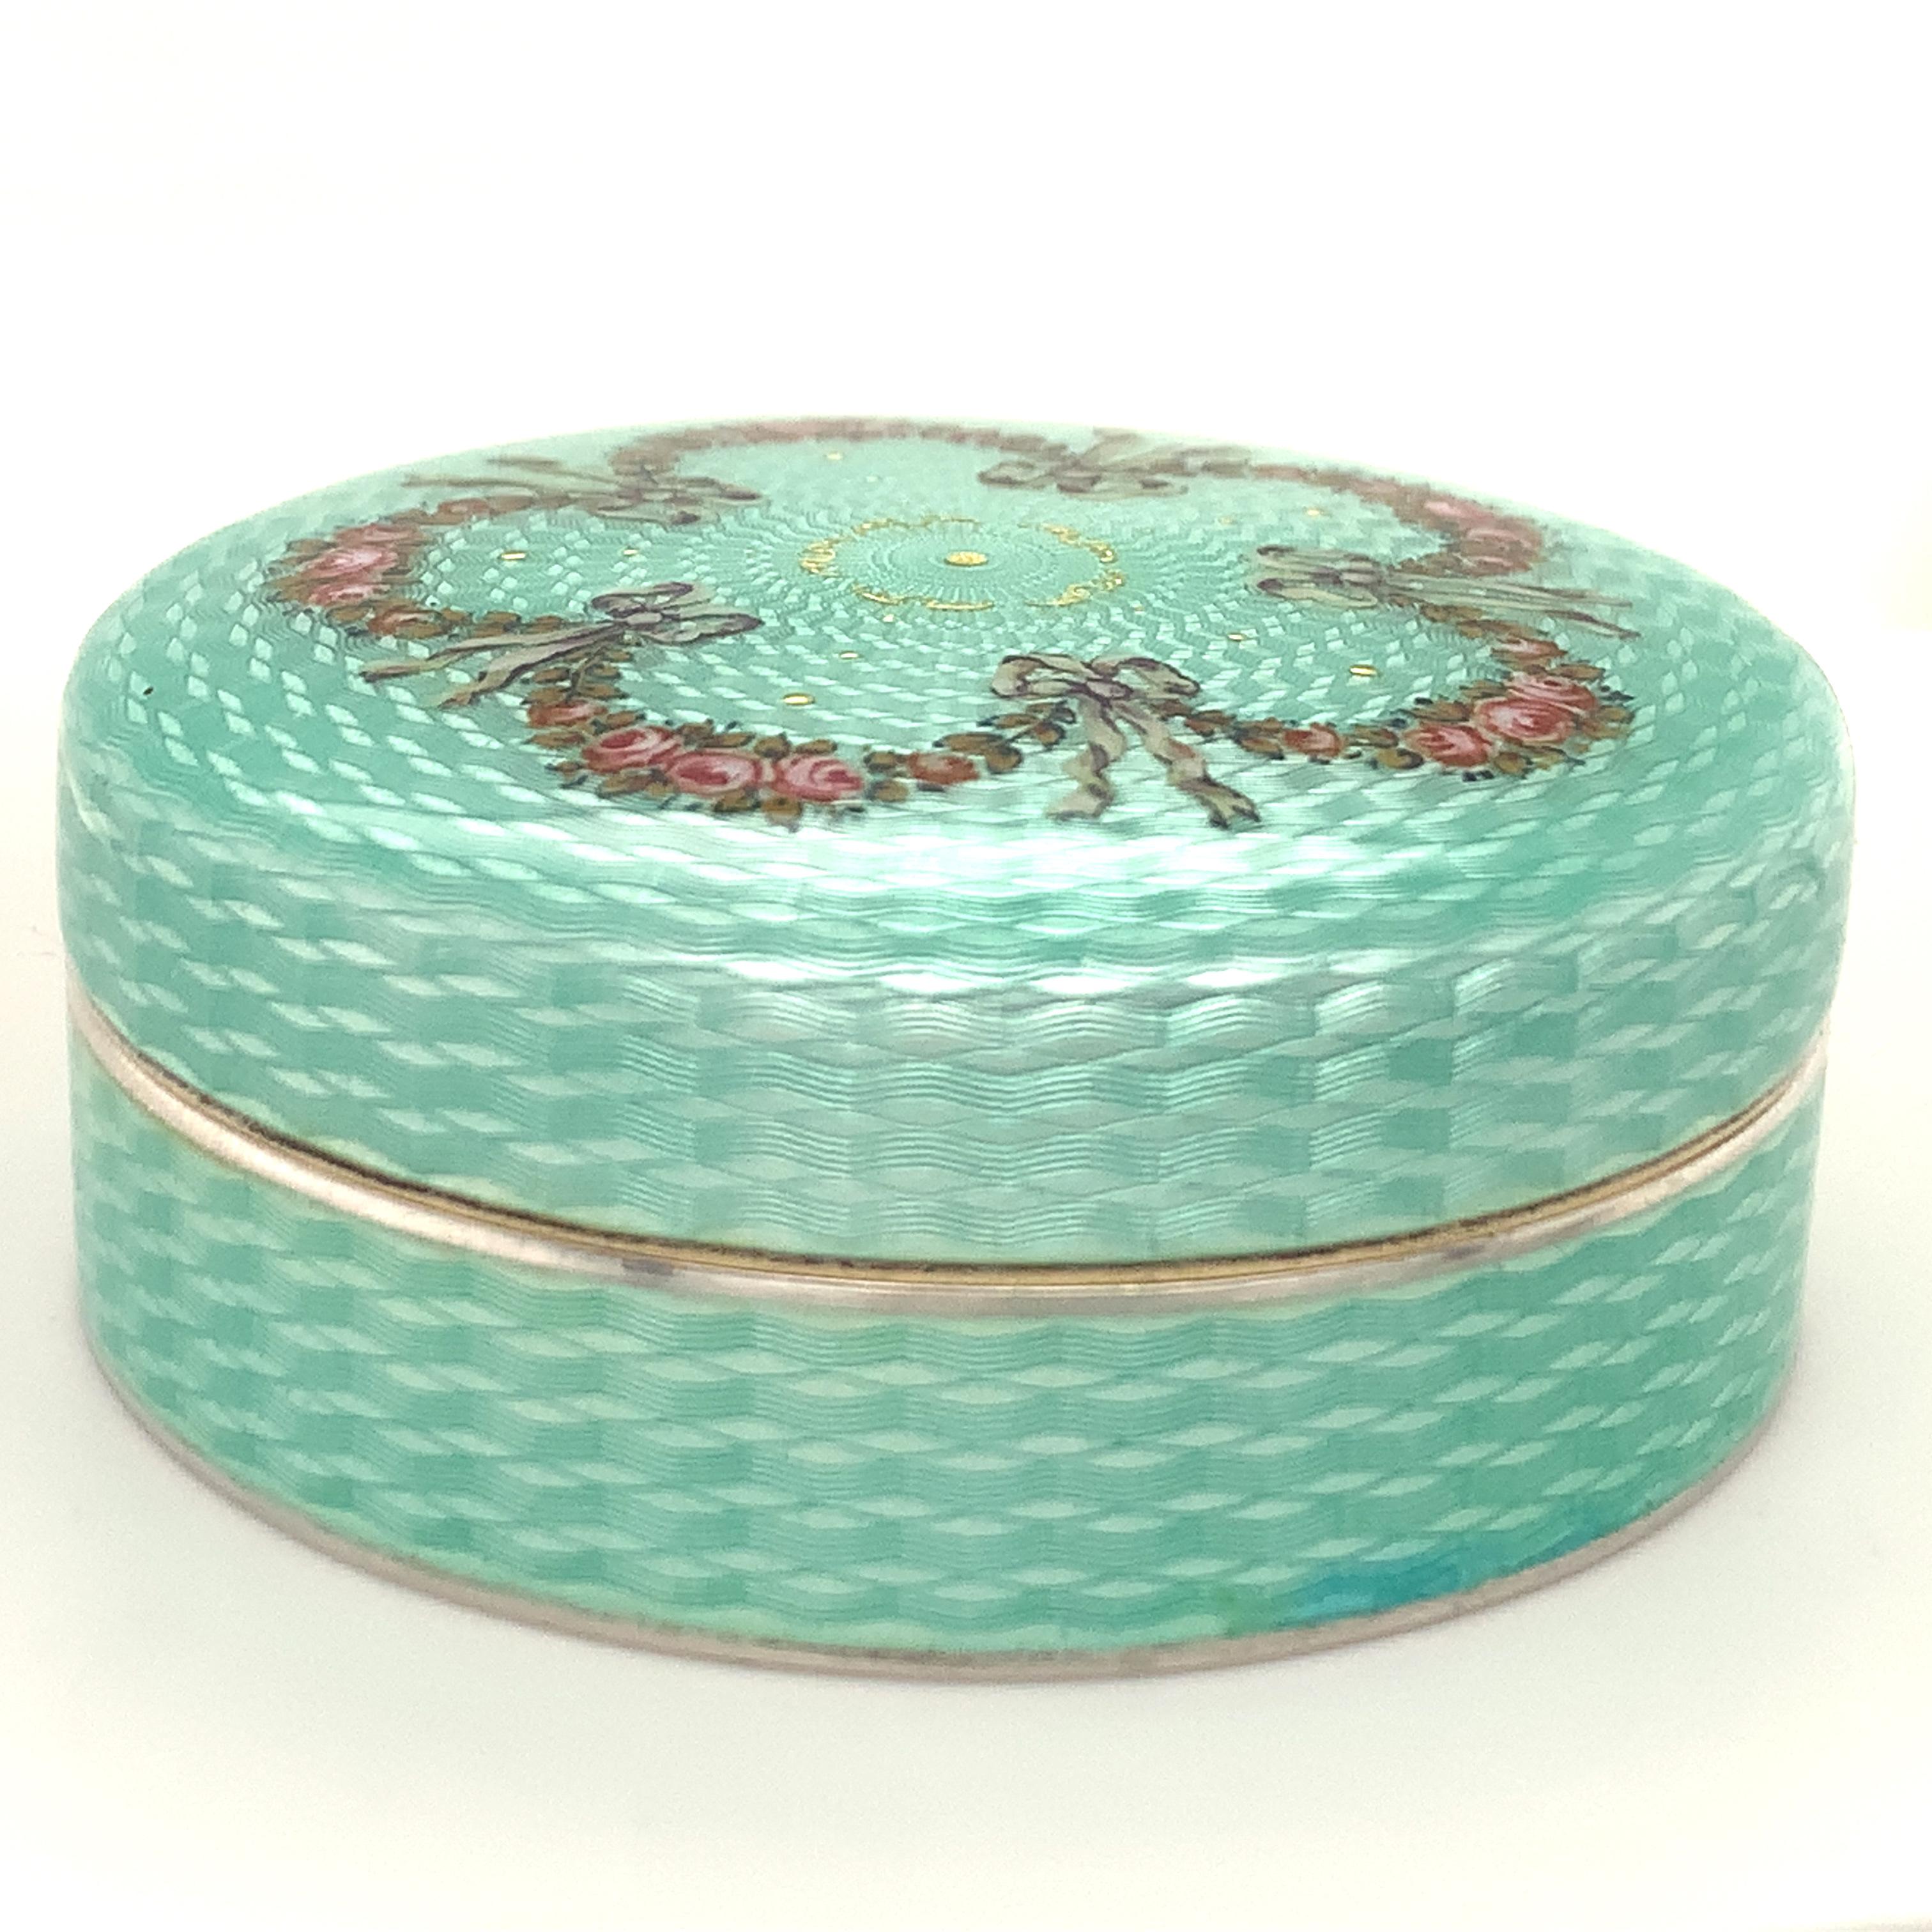 Exquisite guilloche enamel round covered box.  A luminous sea green color, with great brilliance and depth. Top and sides entirely covered with enamel, decorated with garlands of delicate pink and green rosettes and leaves, with gold leaf detailing.